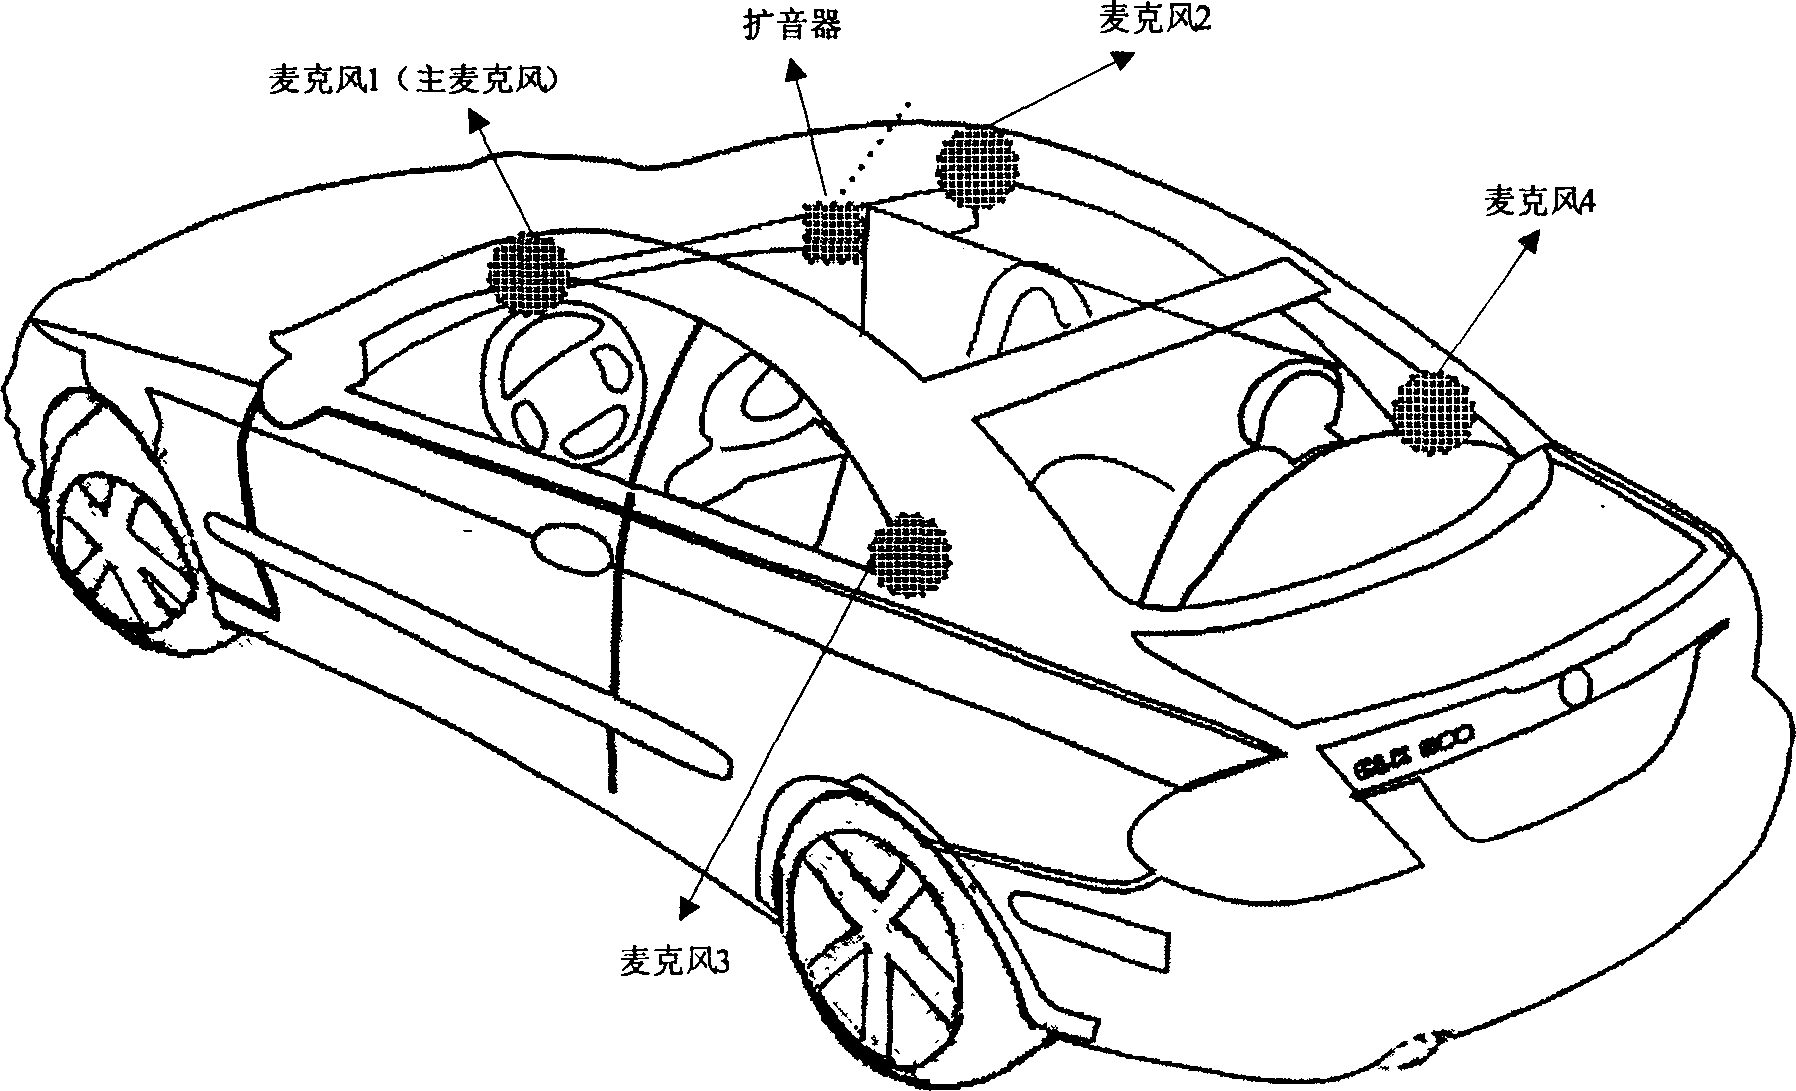 Vehicle-carried hands-free telephone device based on microphone array